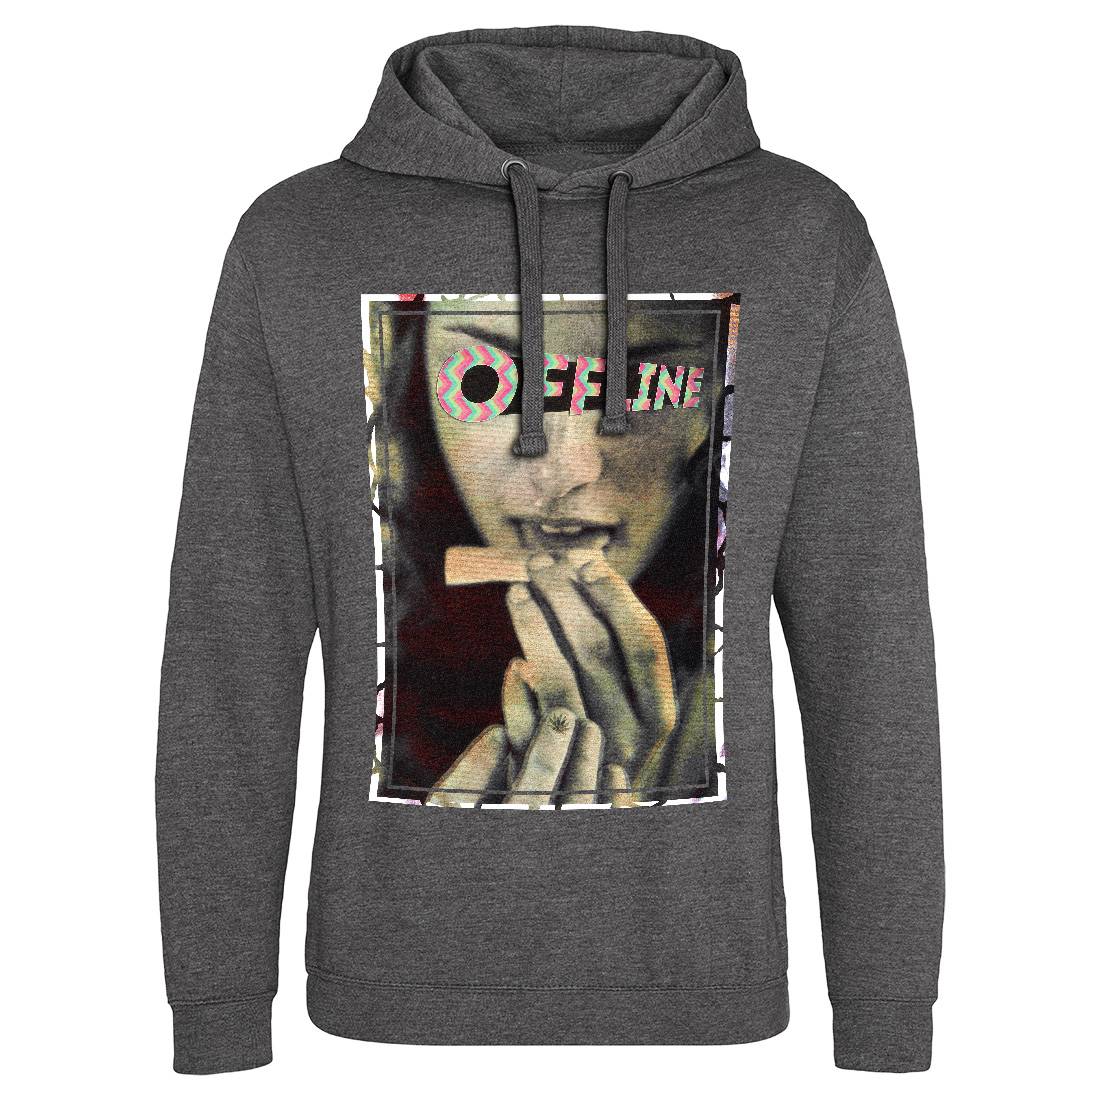 Offline Mens Hoodie Without Pocket Drugs A890